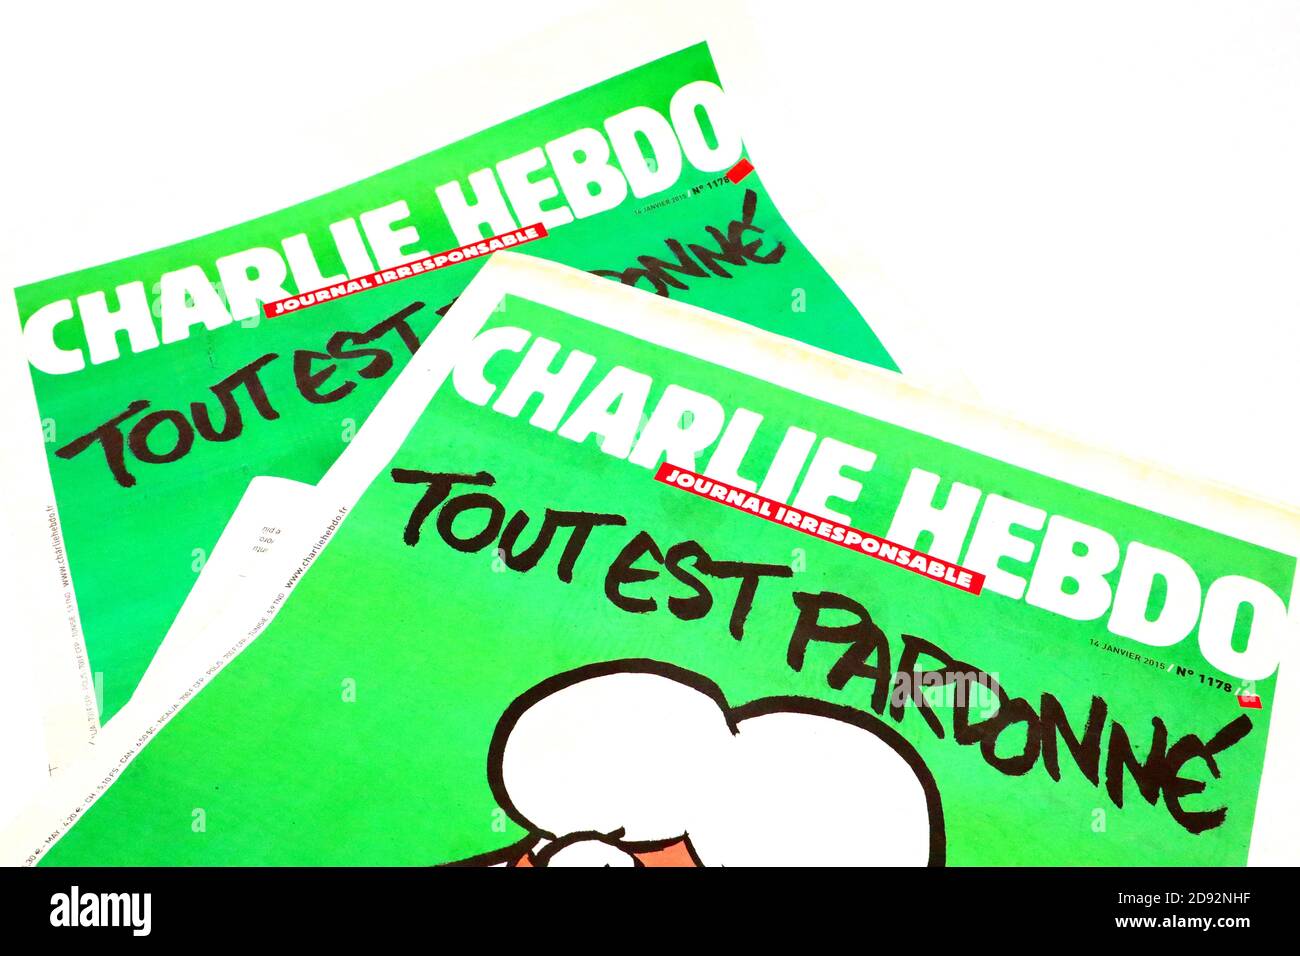 French satirical weekly CHARLIE HEBDO No. 1178, published on January 14, 2015. The first issue after the Charlie Hebdo shooting on January 7, 2015 Stock Photo